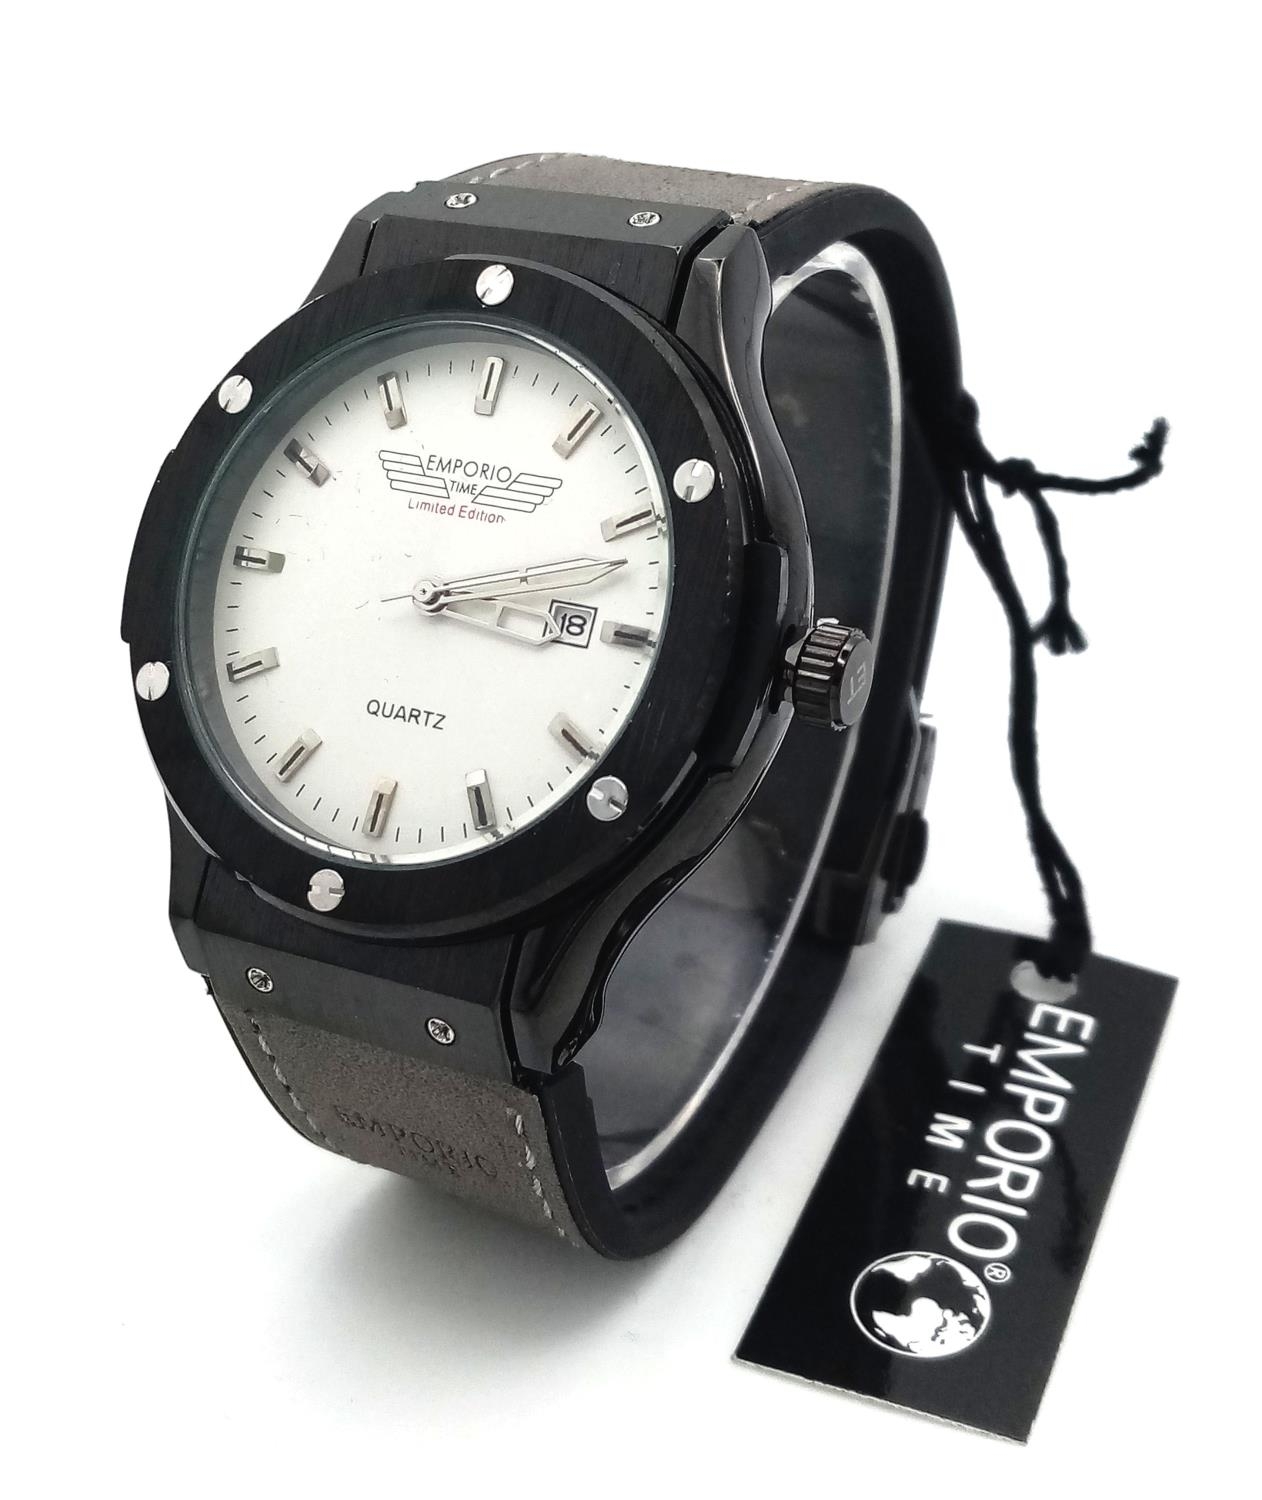 An Emporio Limited Edition Quartz Gents Watch. Grey leather strap. Stainless steel and ceramic